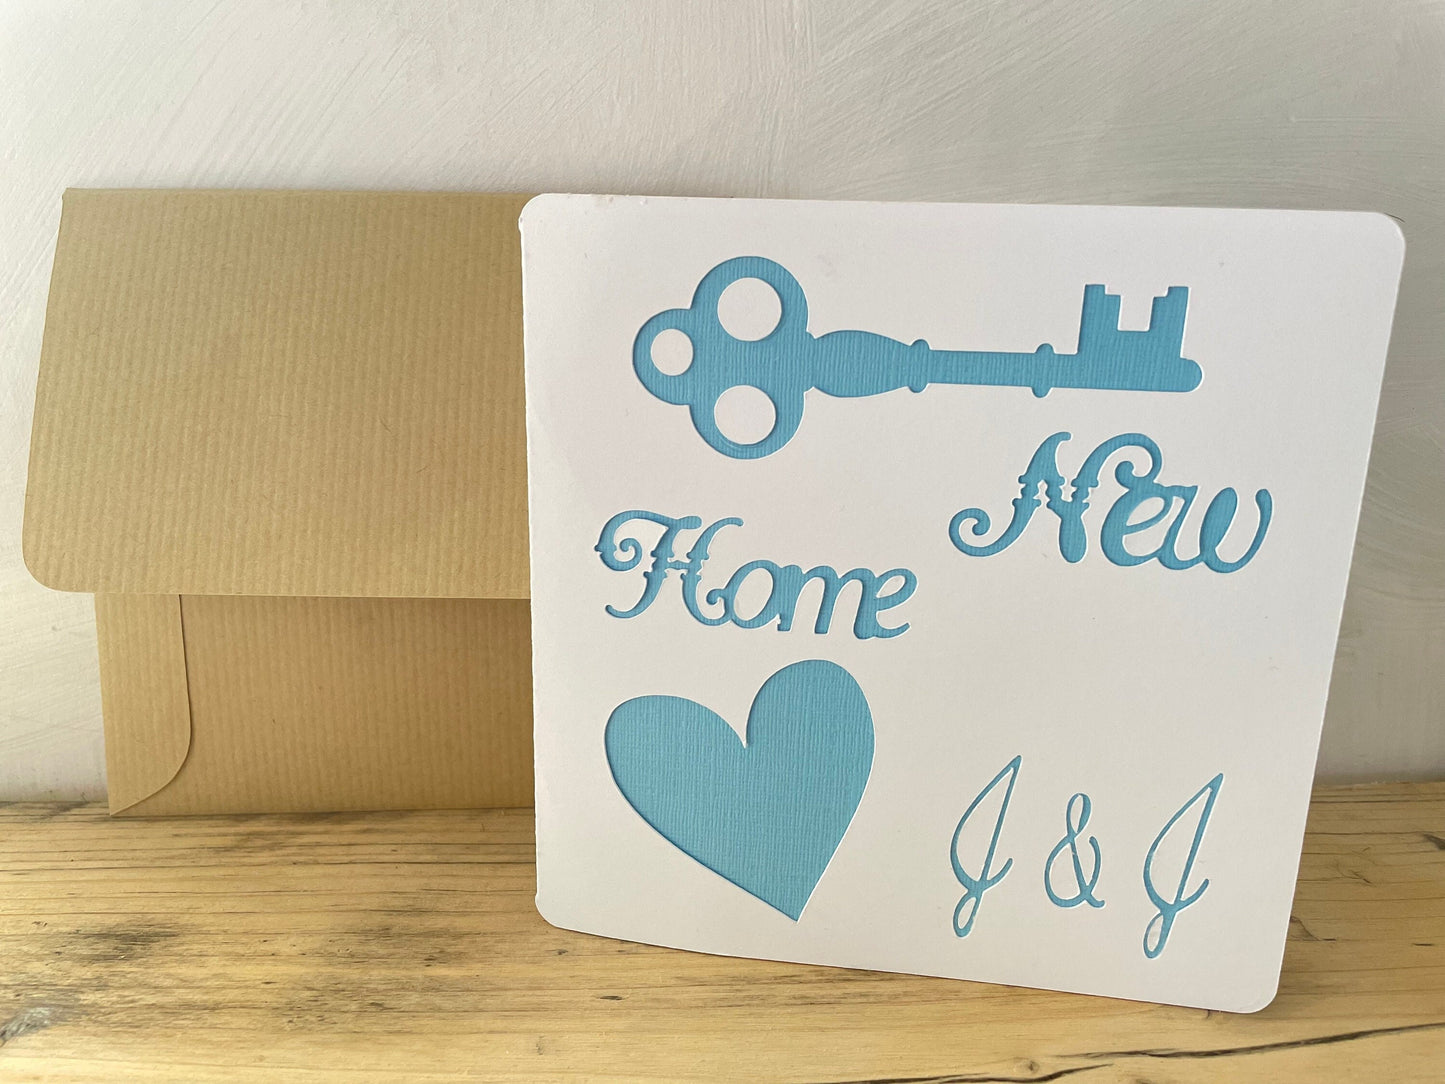 Personalised Couples New Home Greetings Card, Die Cut Key to the Door Congratulations, Moving to new Home Card with Handmade Envelope